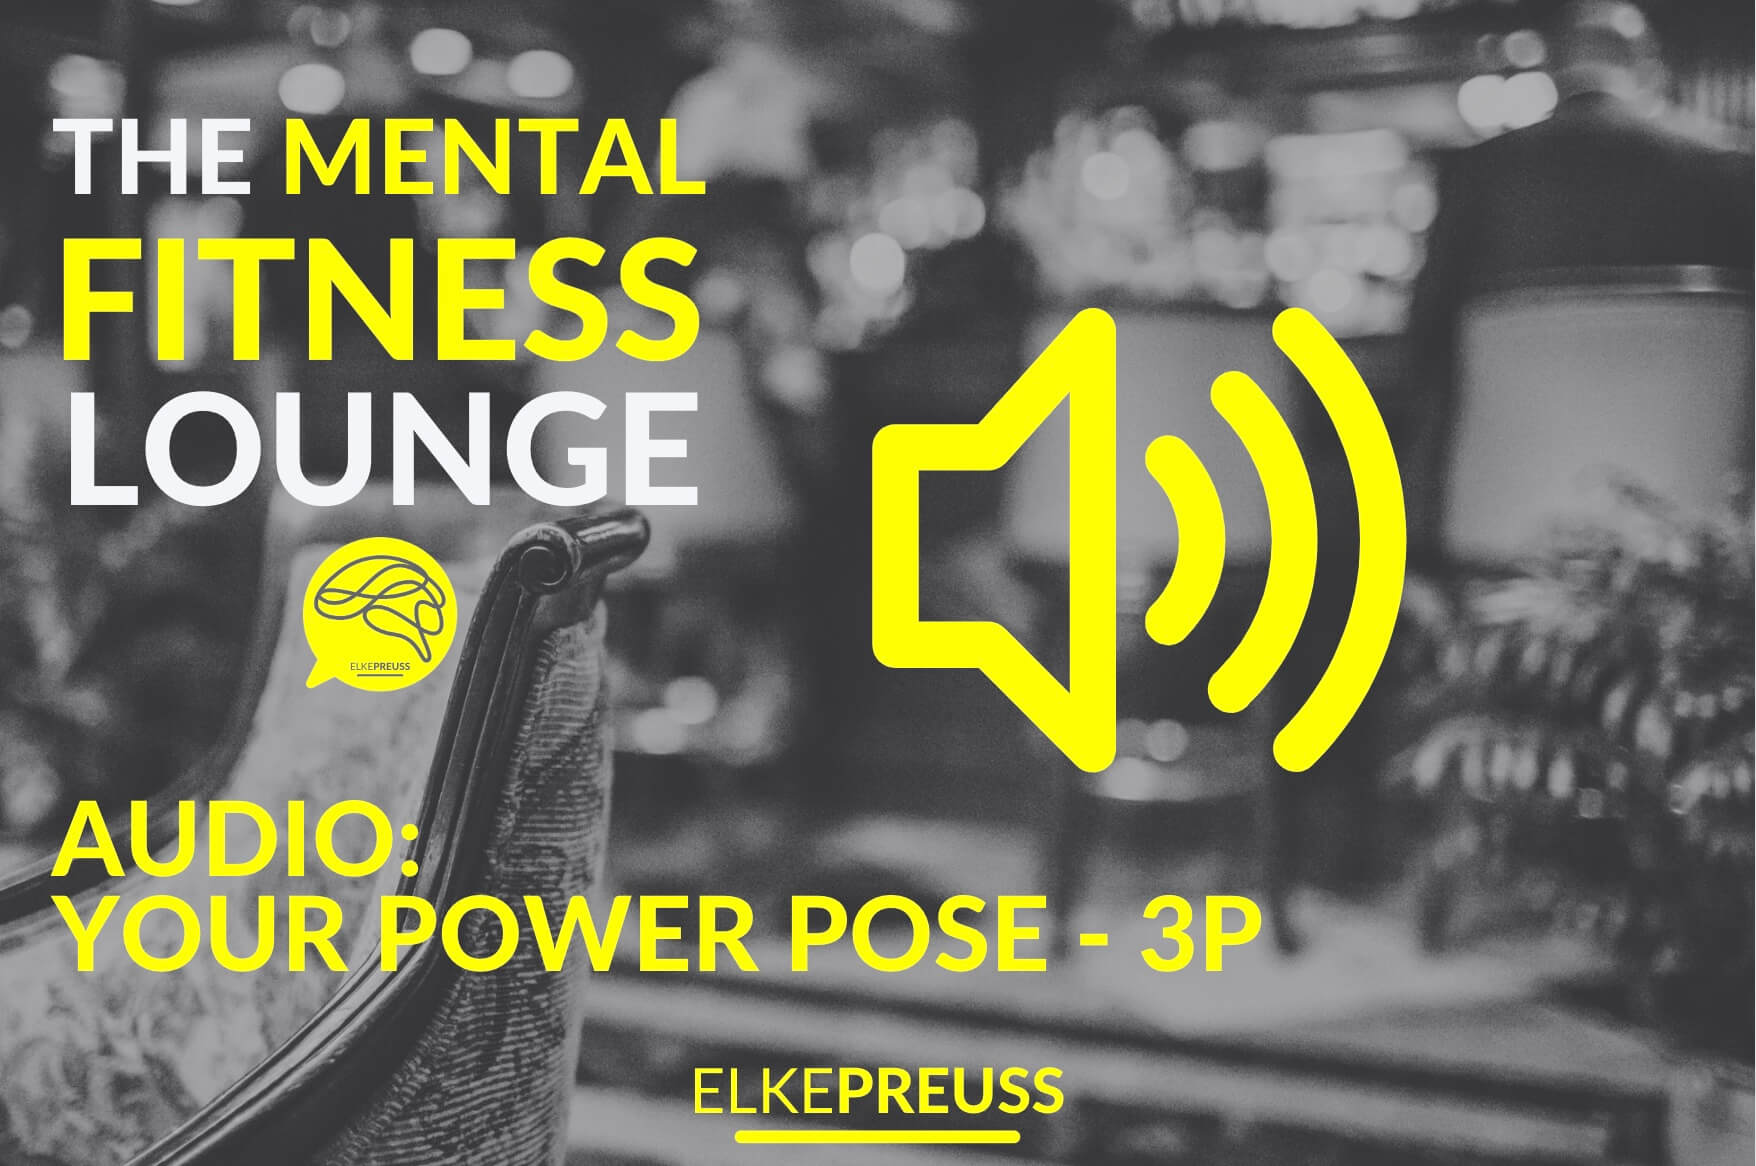 THE MENTAL FITNESS LOUNGE Power Pose